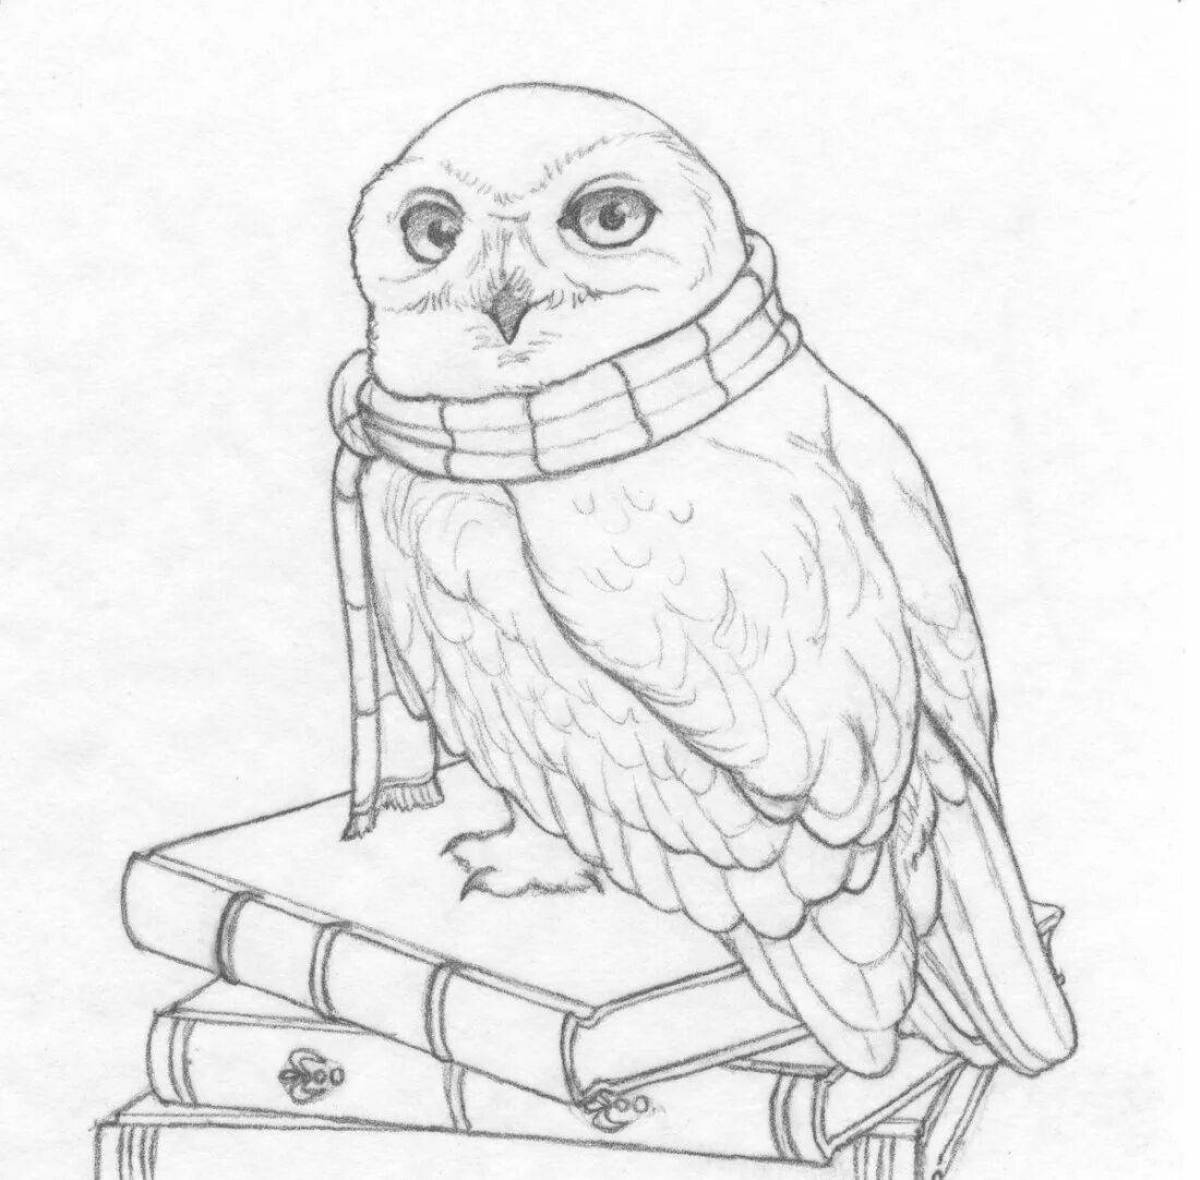 Hedwig's glowing coloring book from Harry Potter